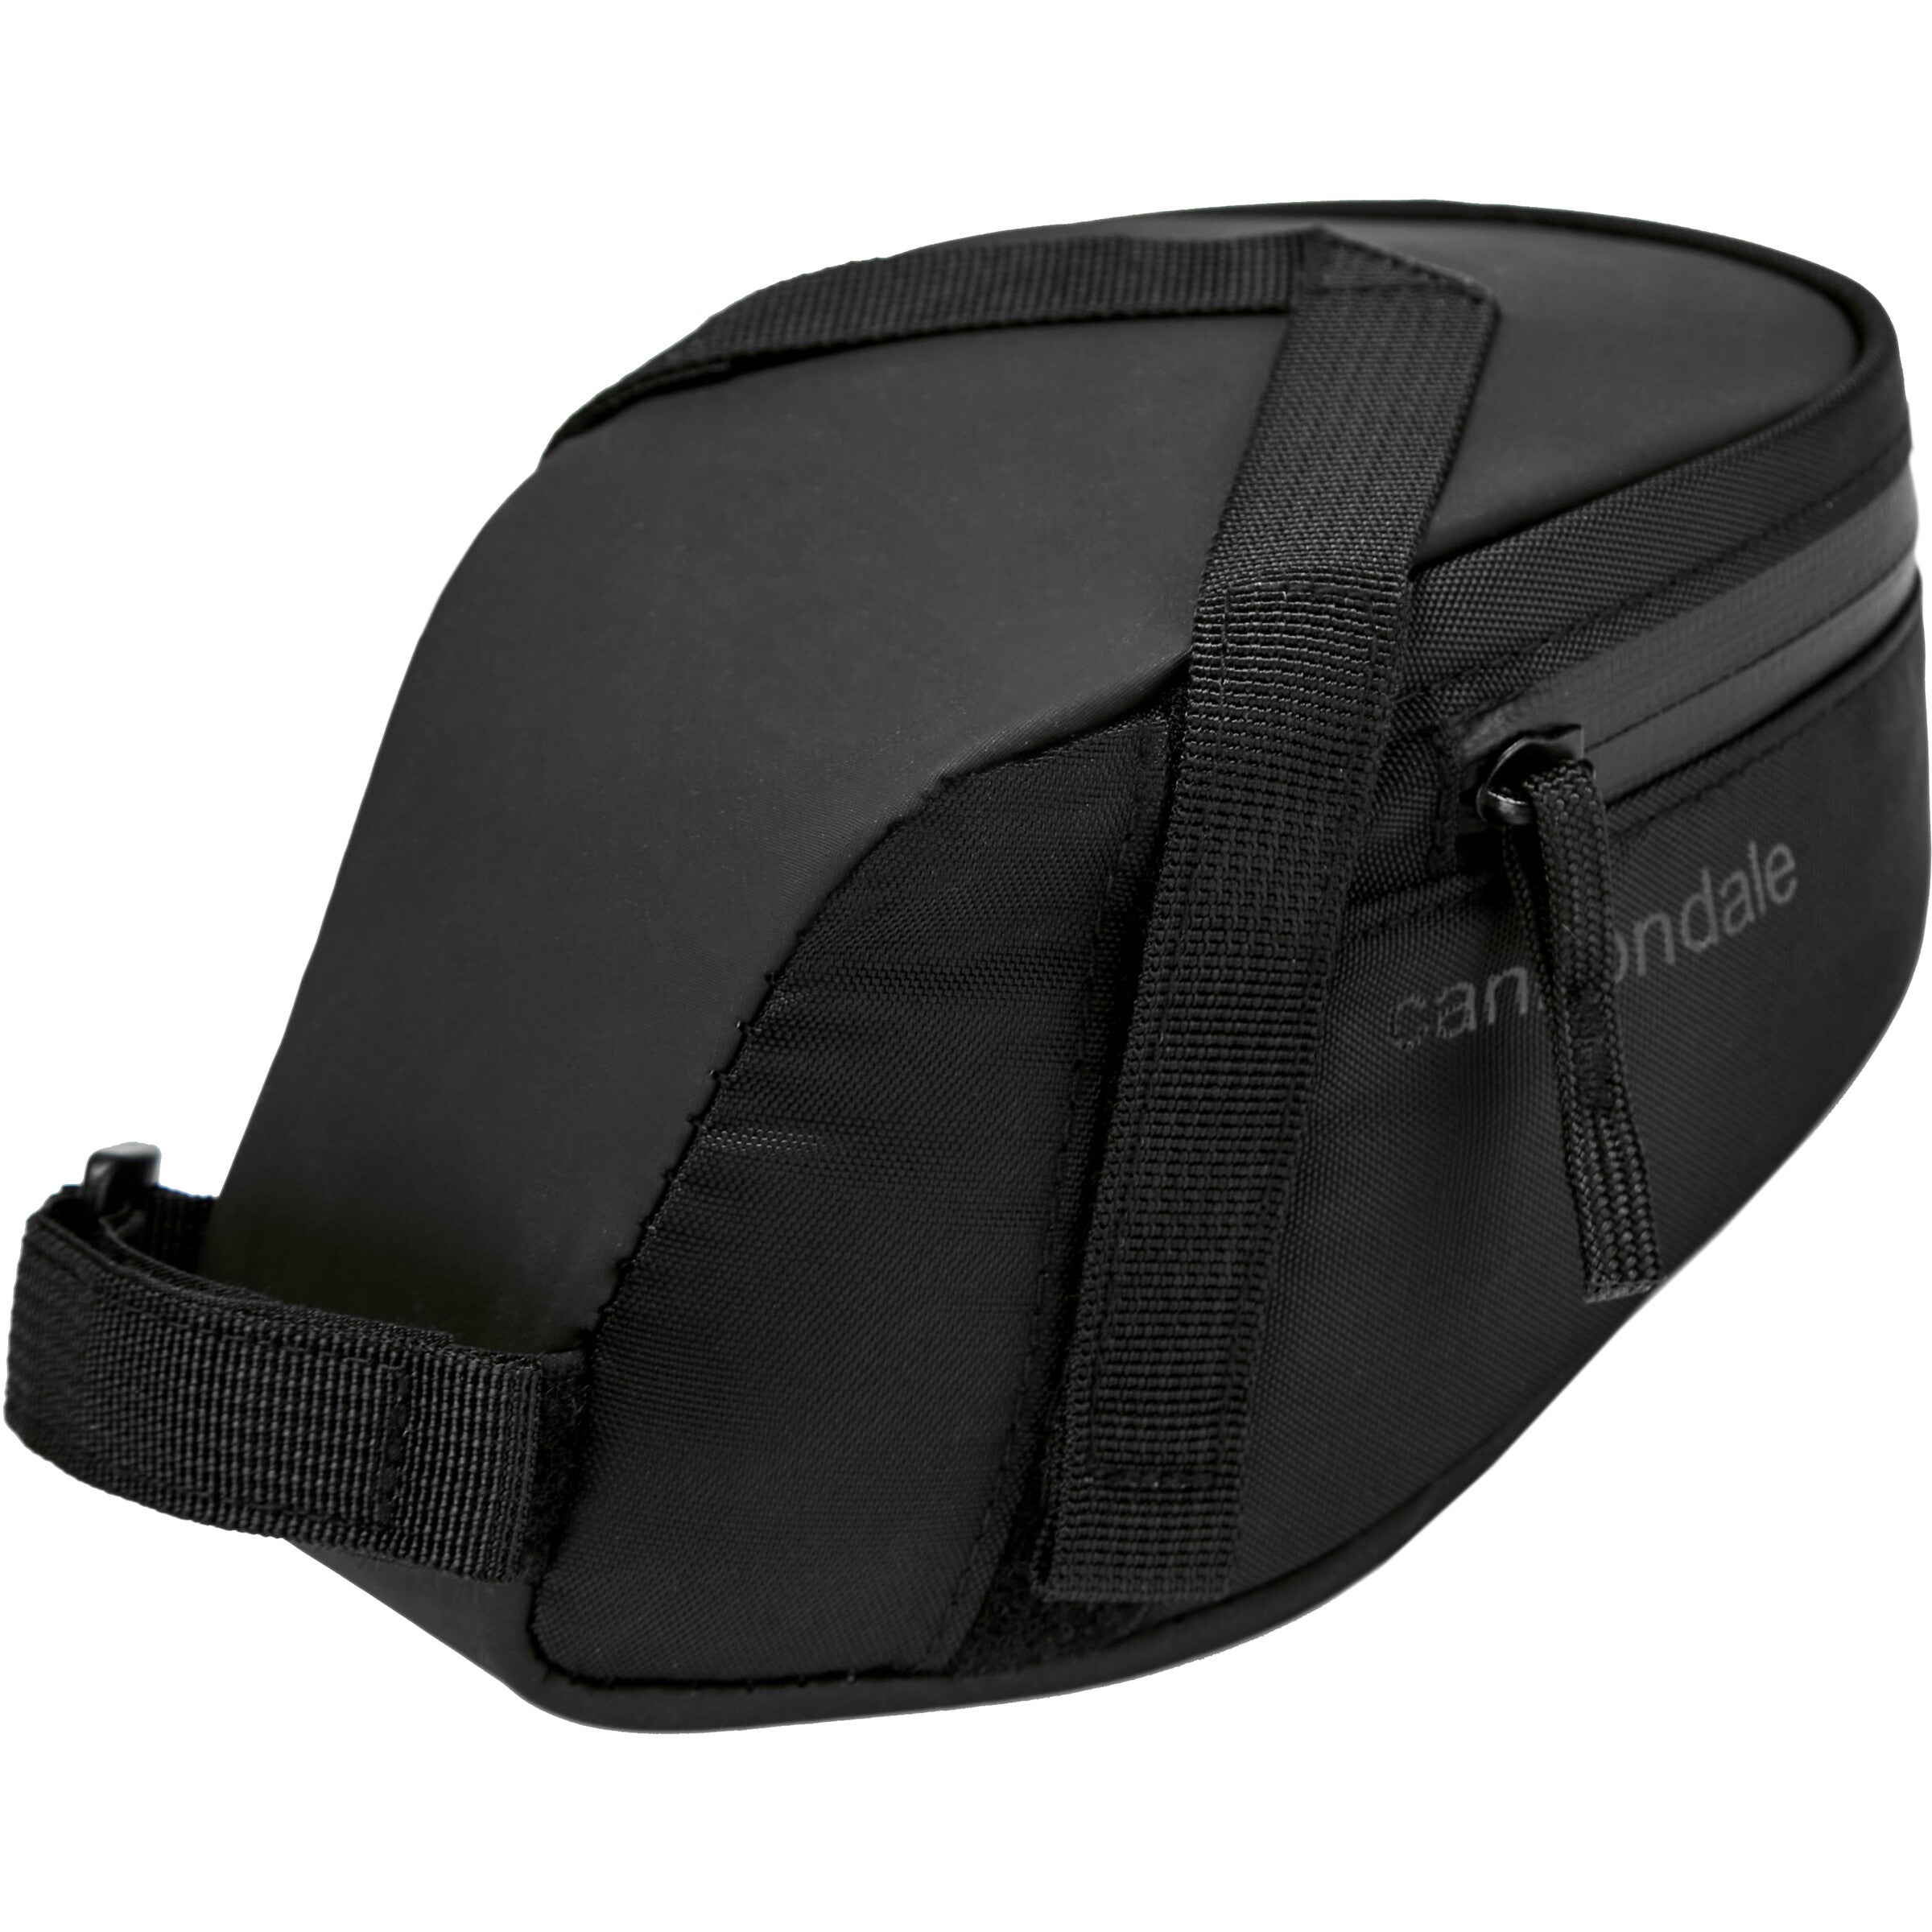 Cannondale Contain Stitched Velcro Satteltasche - Large